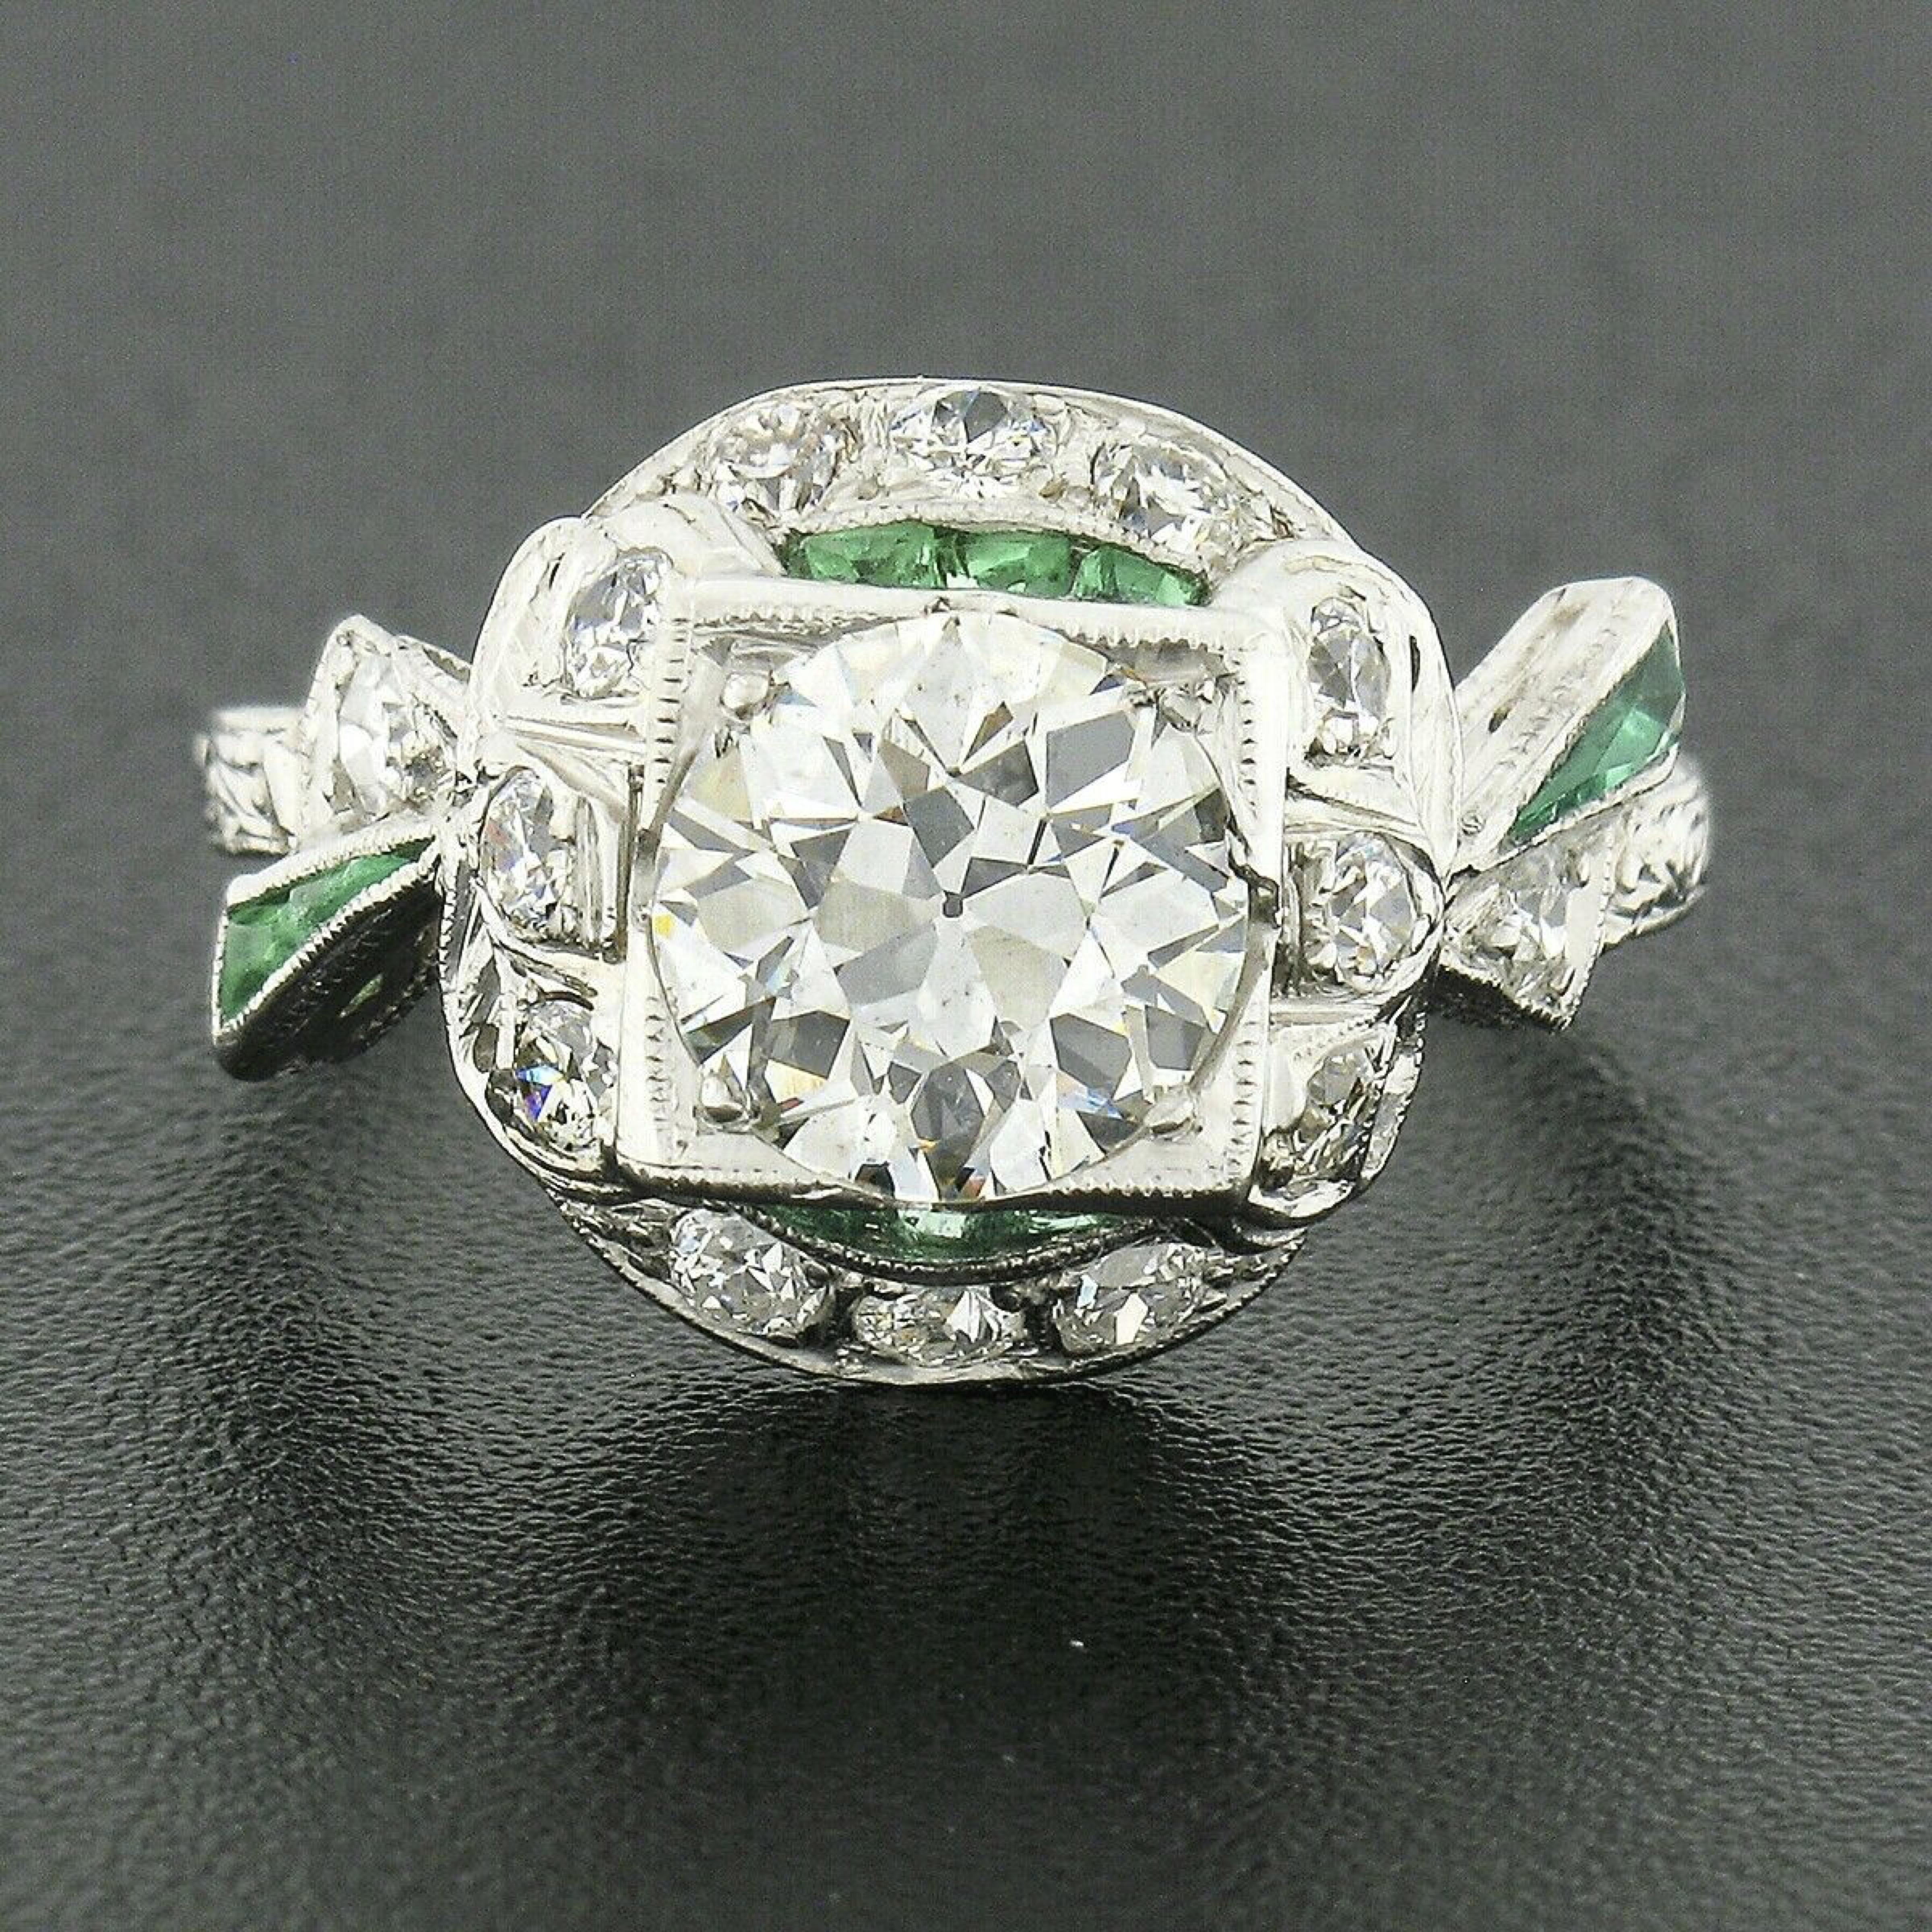 This truly breathtaking antique diamond engagement ring was crafted in solid platinum during the early art deco period. This ring features a large old European cut diamond that's neatly prong set at the center of a square shaped basket weighing